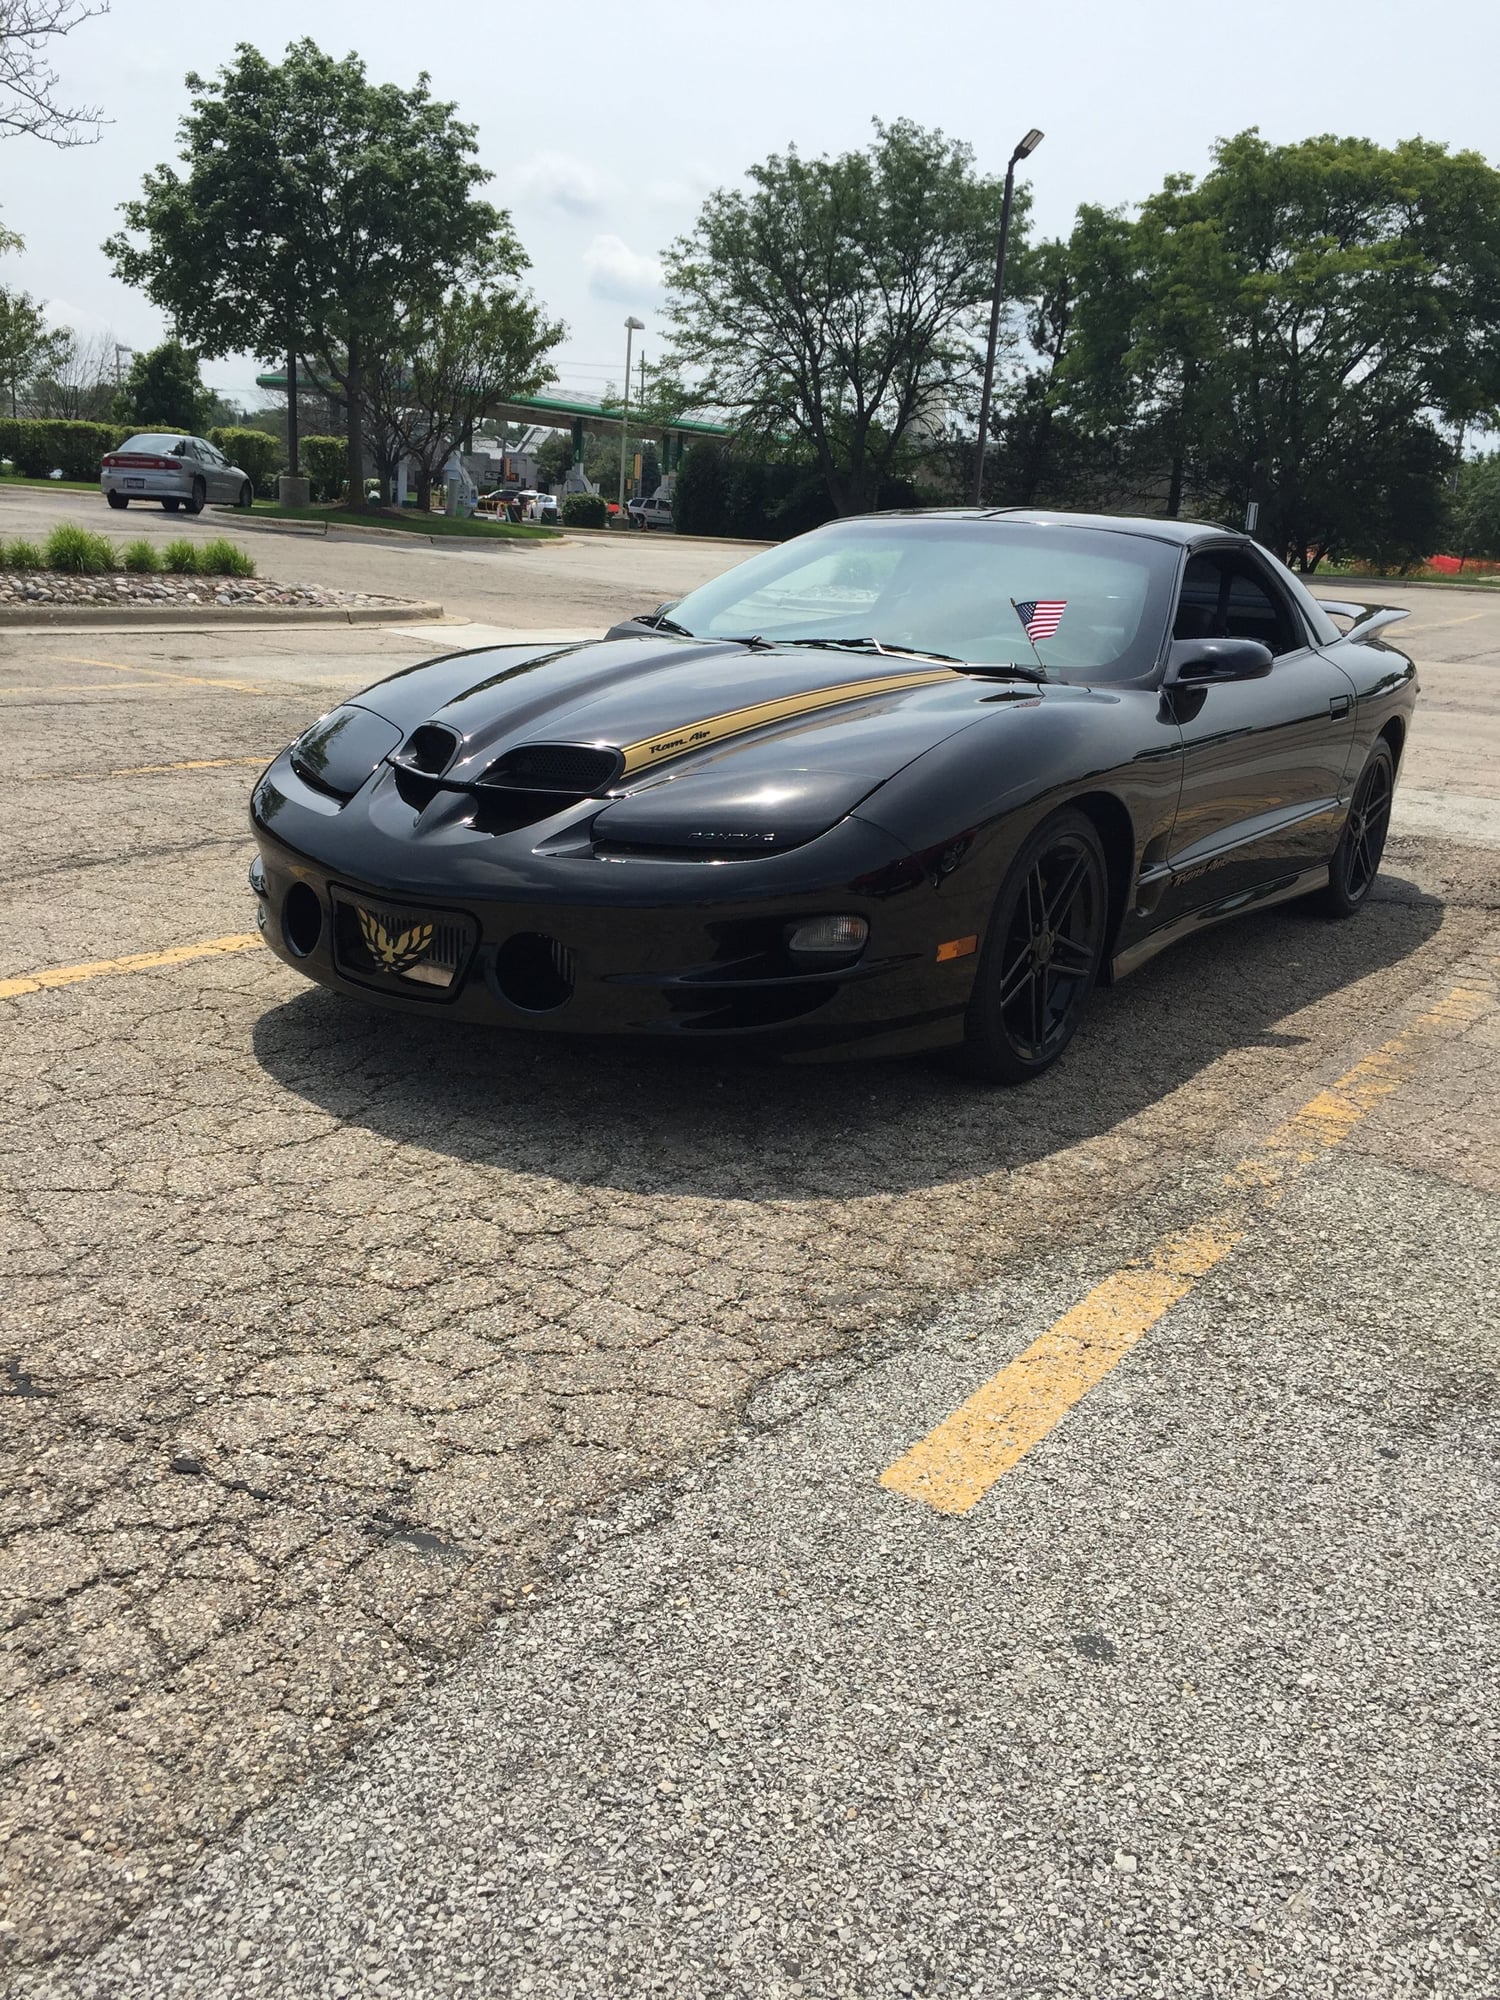 2000 Pontiac Firebird - F/S Trans am WS6 Twin Turbo *Low Miles* - Used - VIN 2G2FV22G1Y2161831 - 10,500 Miles - 8 cyl - 2WD - Manual - Coupe - Black - Addison, IL 60101, United States